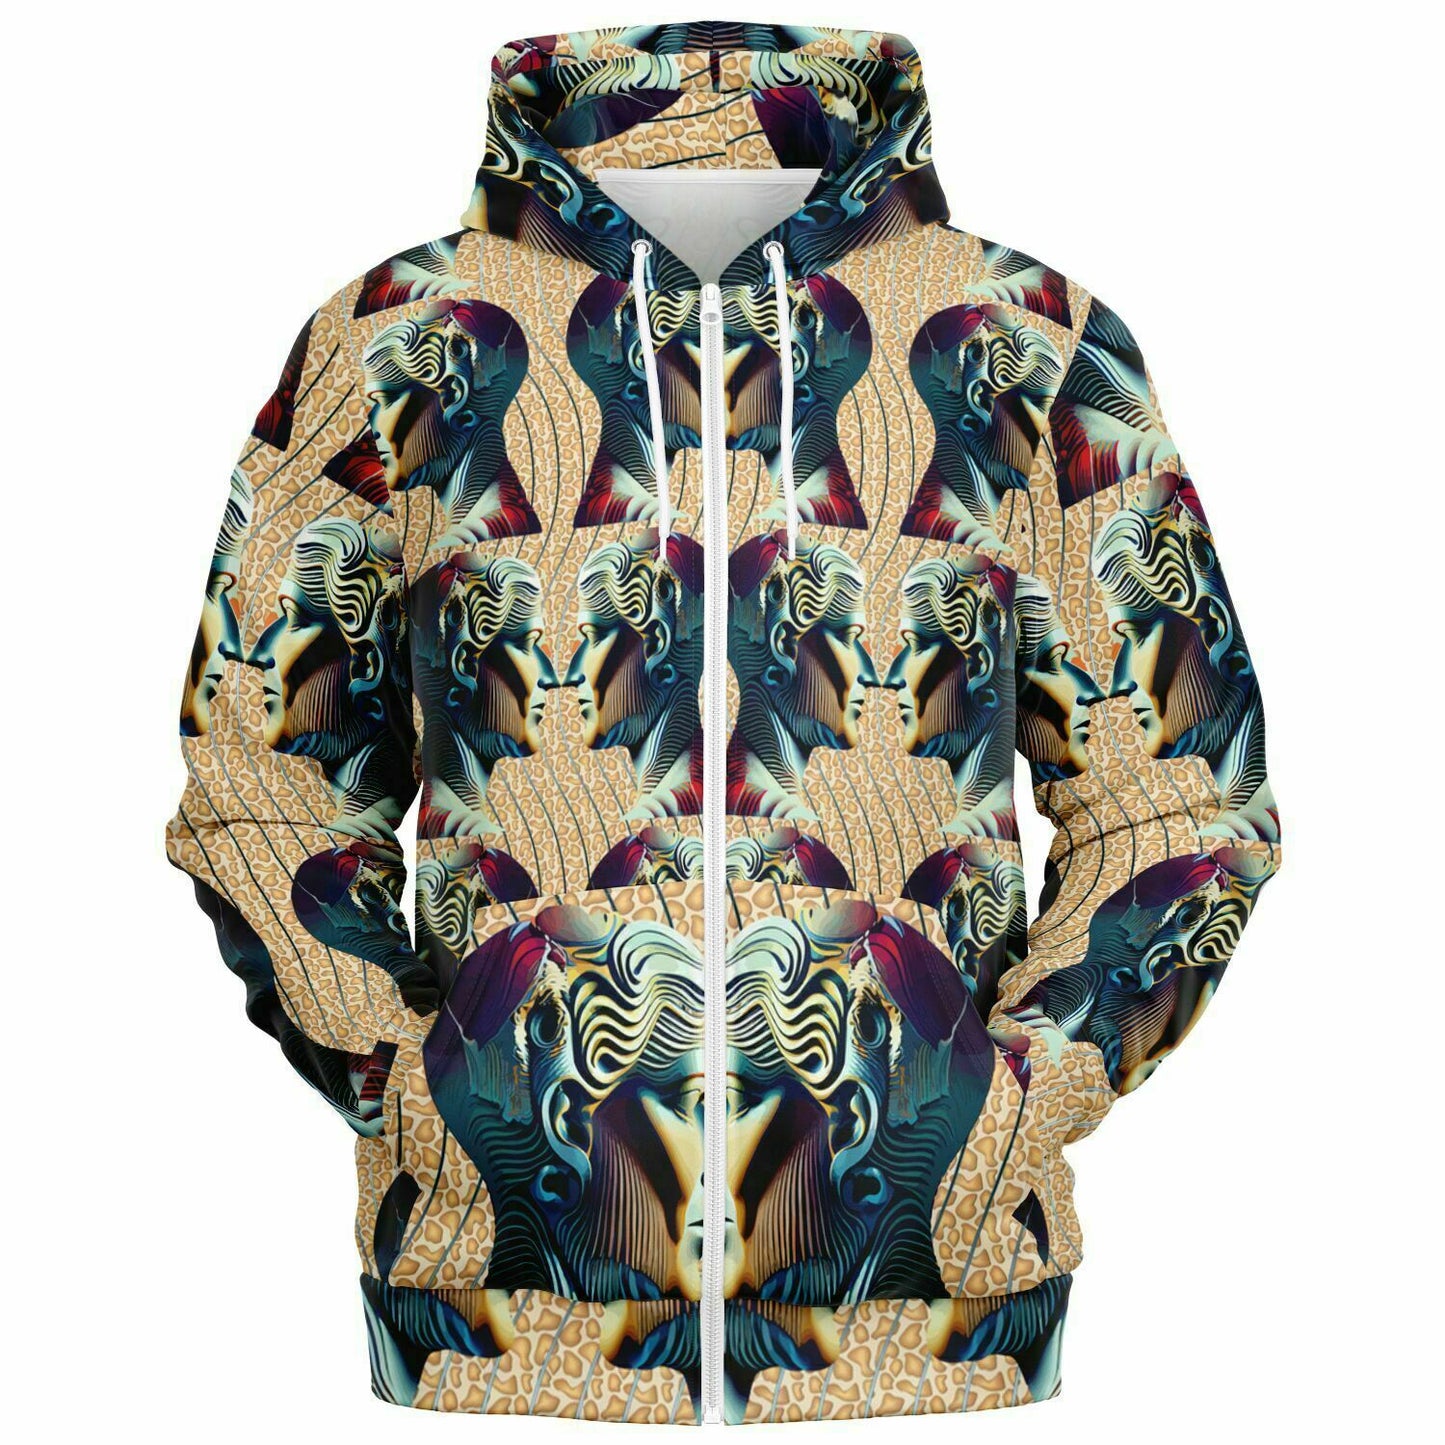 Fashion Zip-Up Hoodie - AOP Kukloso Ancients series No 5 - Free Shipping